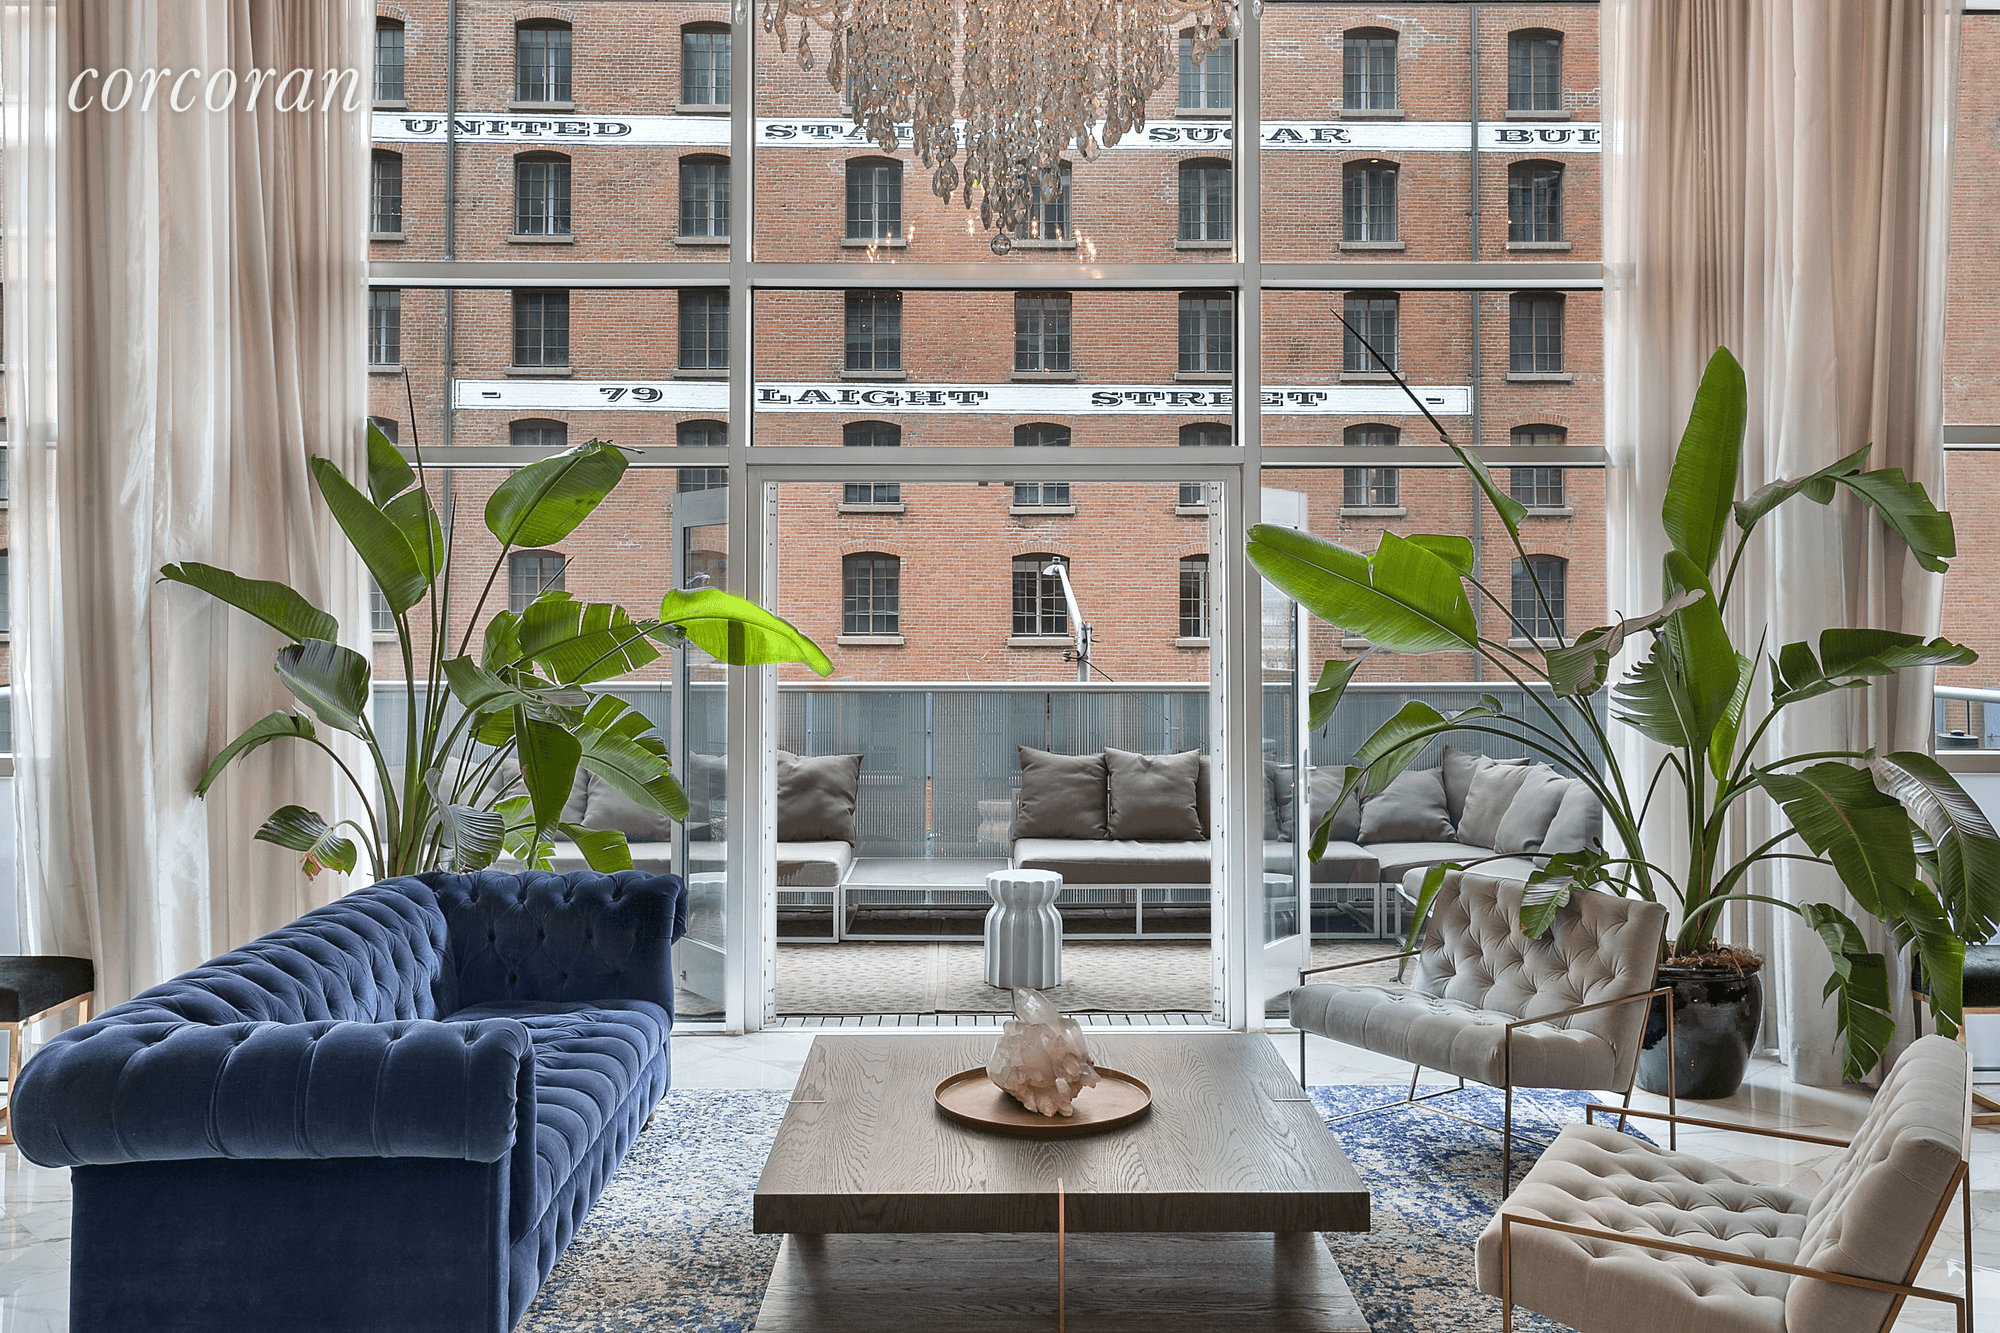 Located in the distinguished section of TriBeCa's Historic District, nestled on a tree lined, and only a few feet from cobblestone streets and the waterfront, is The Glass Condominium Building.